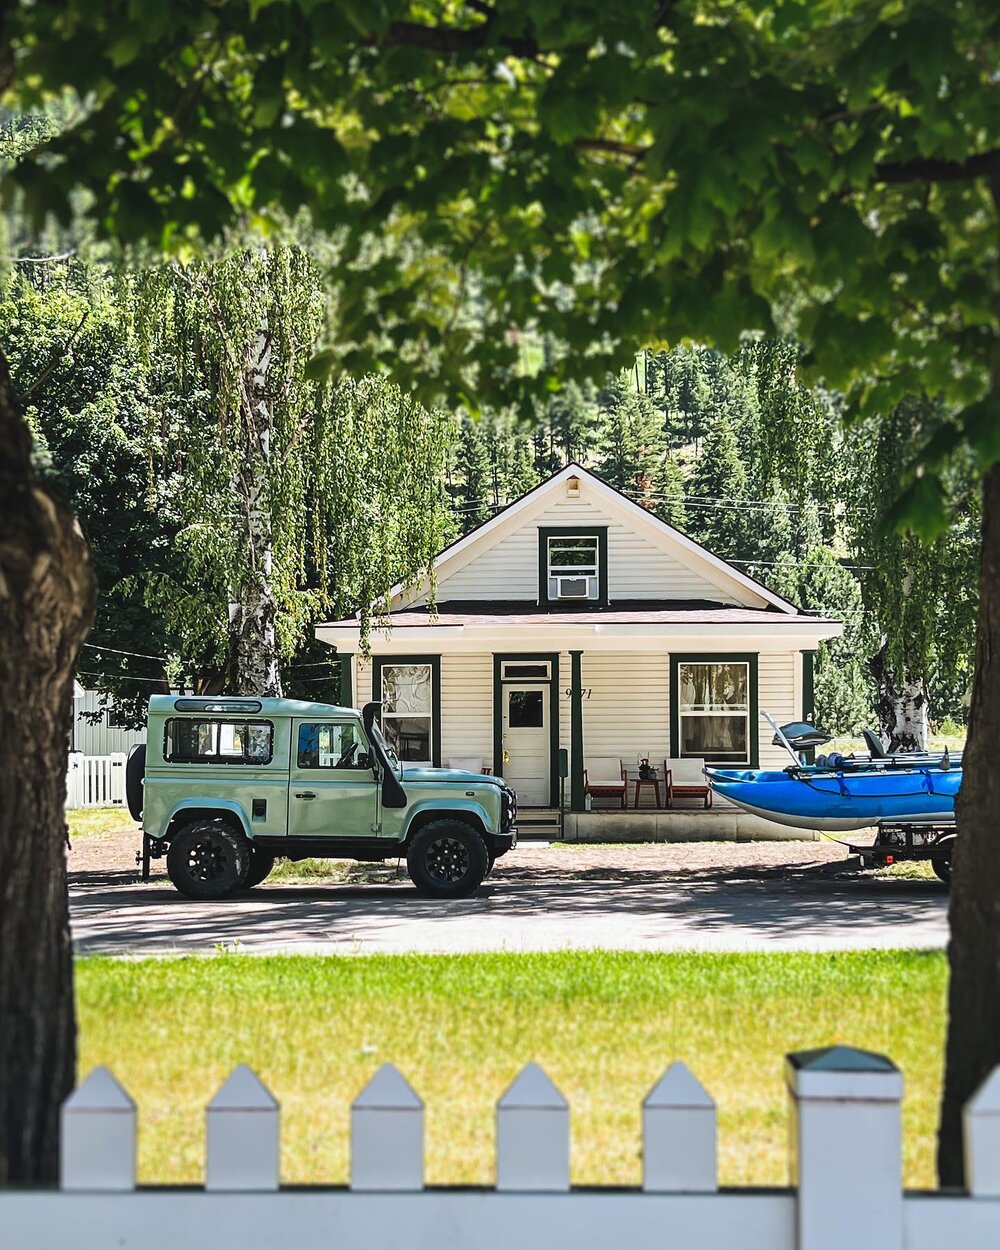 The American dream.. or something. I&rsquo;m more about the Land Rover Defender 90 than I am the white picket fence (at least at the moment).
&macr;\_(ツ)_/&macr;
But, to each their own.

&mdash;&mdash;&mdash;&mdash;&mdash;&mdash;&mdash;&mdash;&mdash;